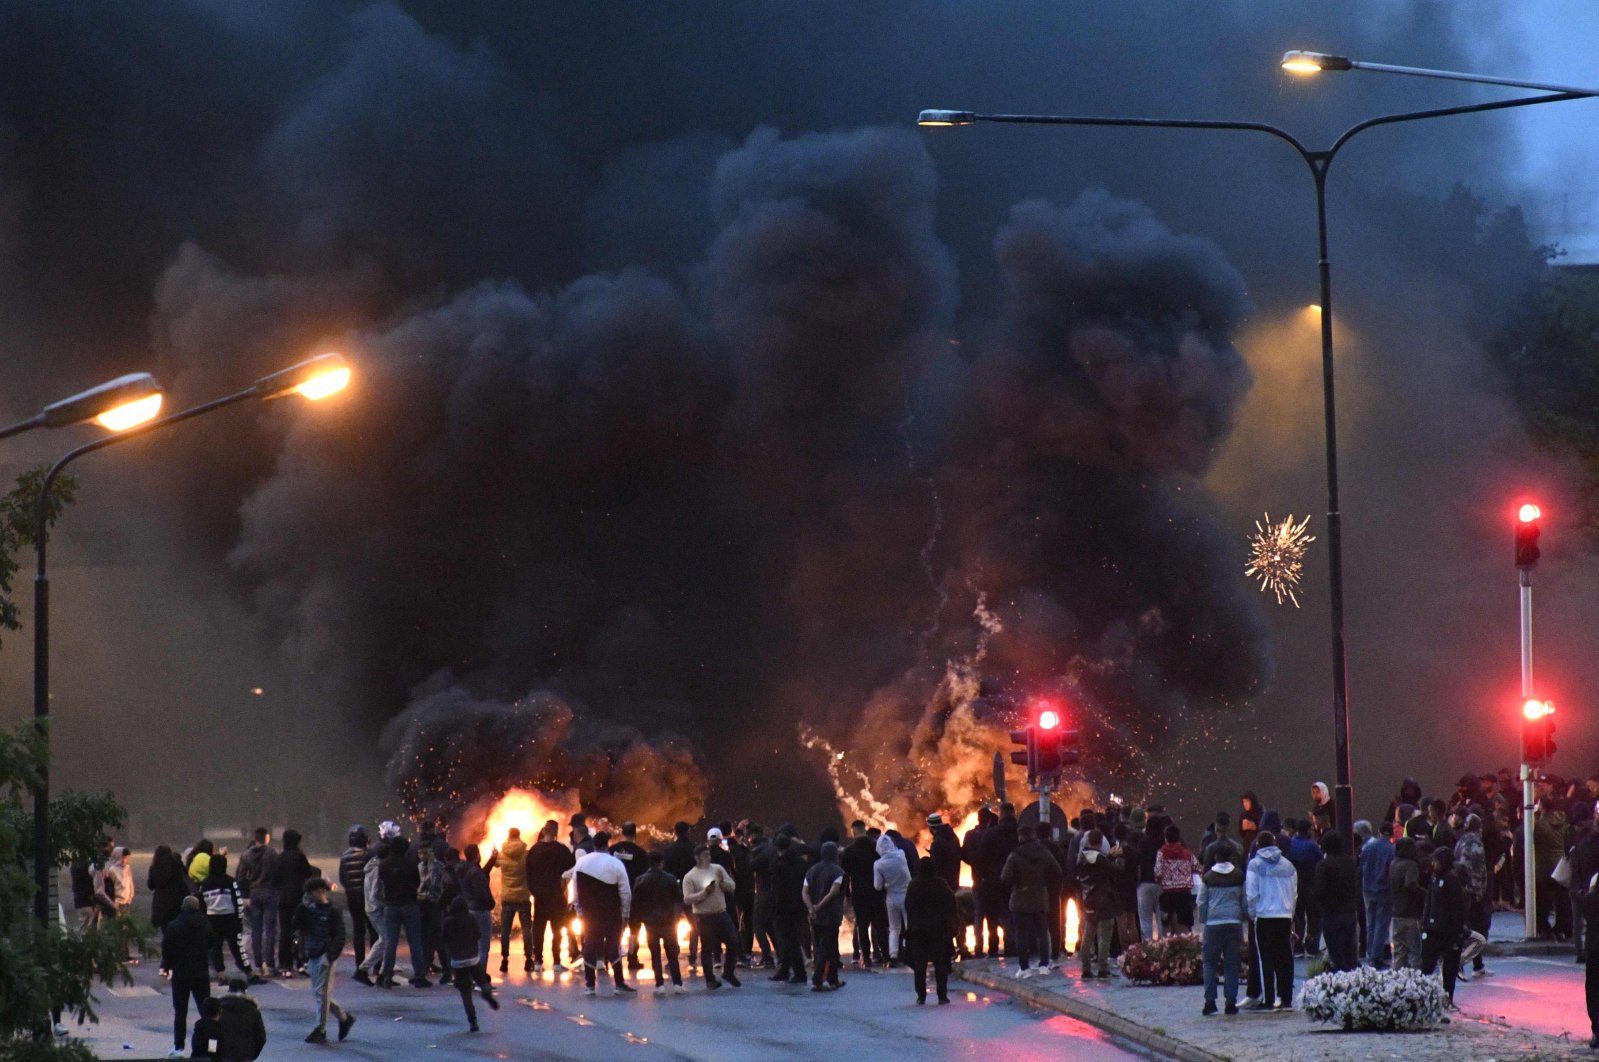 Smoke billows from burning tyres, pallets and fireworks as a few hundred protesters riot, which was sparked by the burning of a Quran, in the Rosengard neighborhood of Malmo, Sweden, Aug. 28, 2020. (AFP)